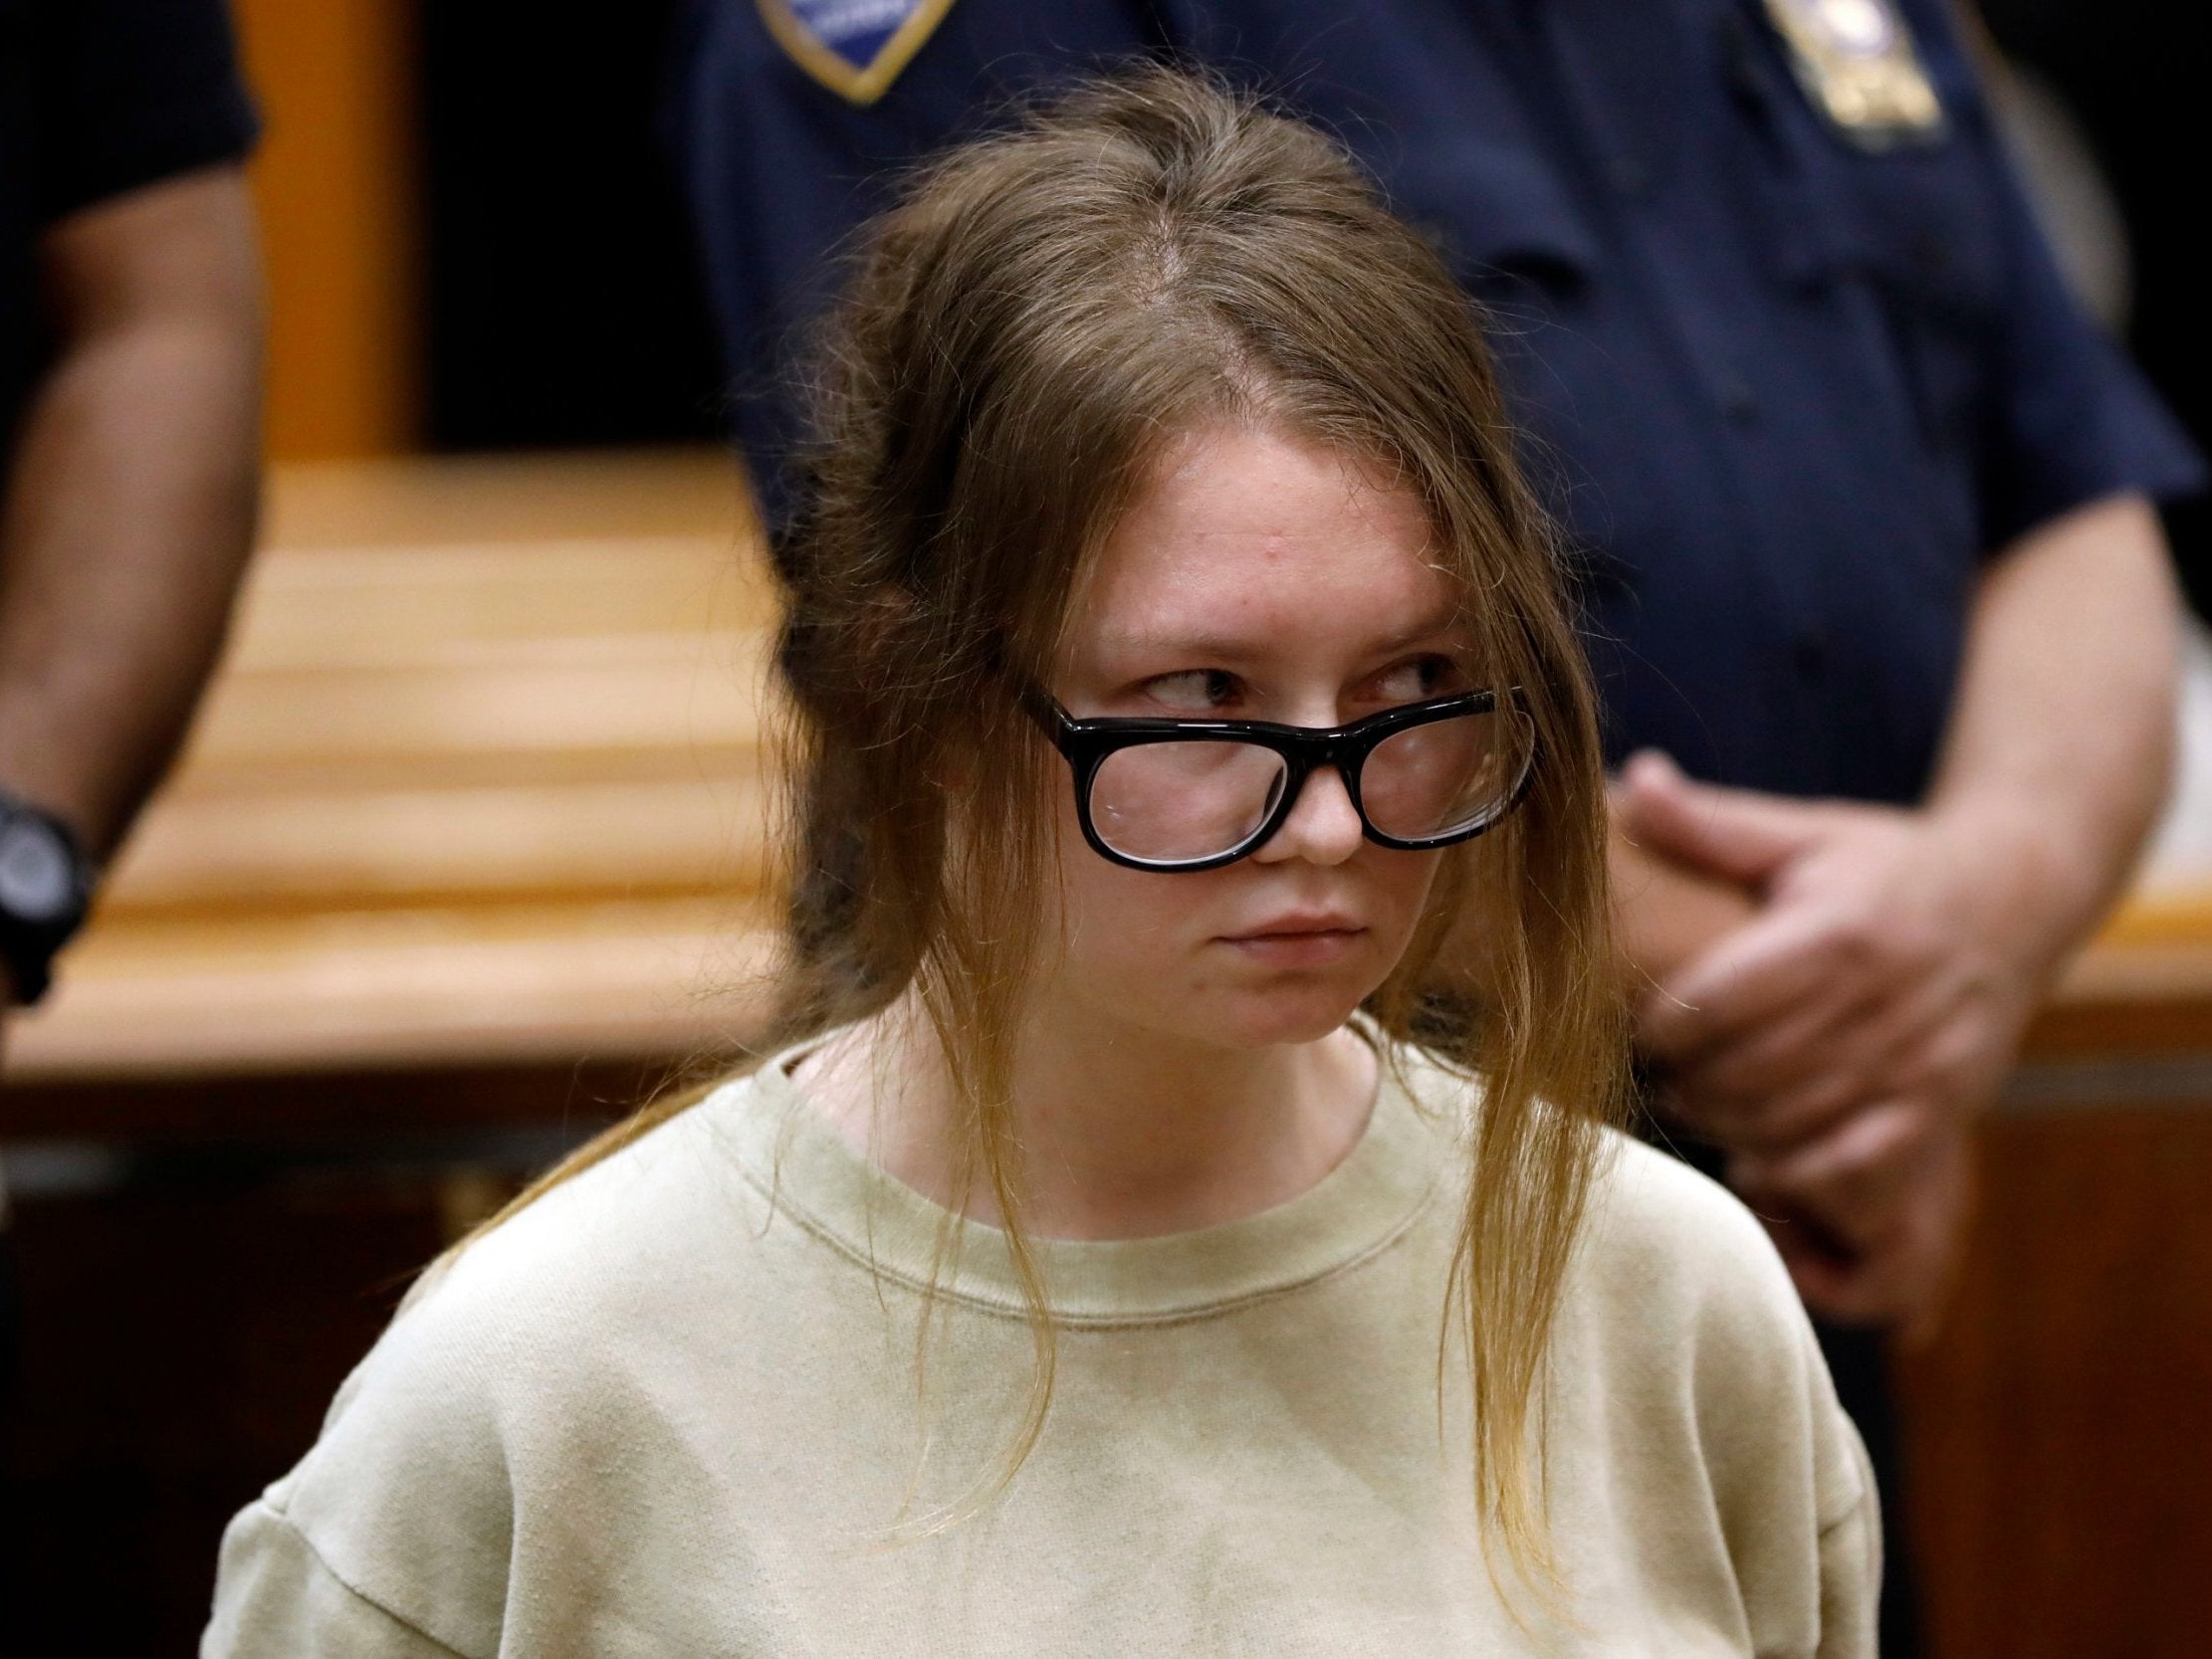 Anna Sorokin appears in New York State Supreme Court on grand larceny charges